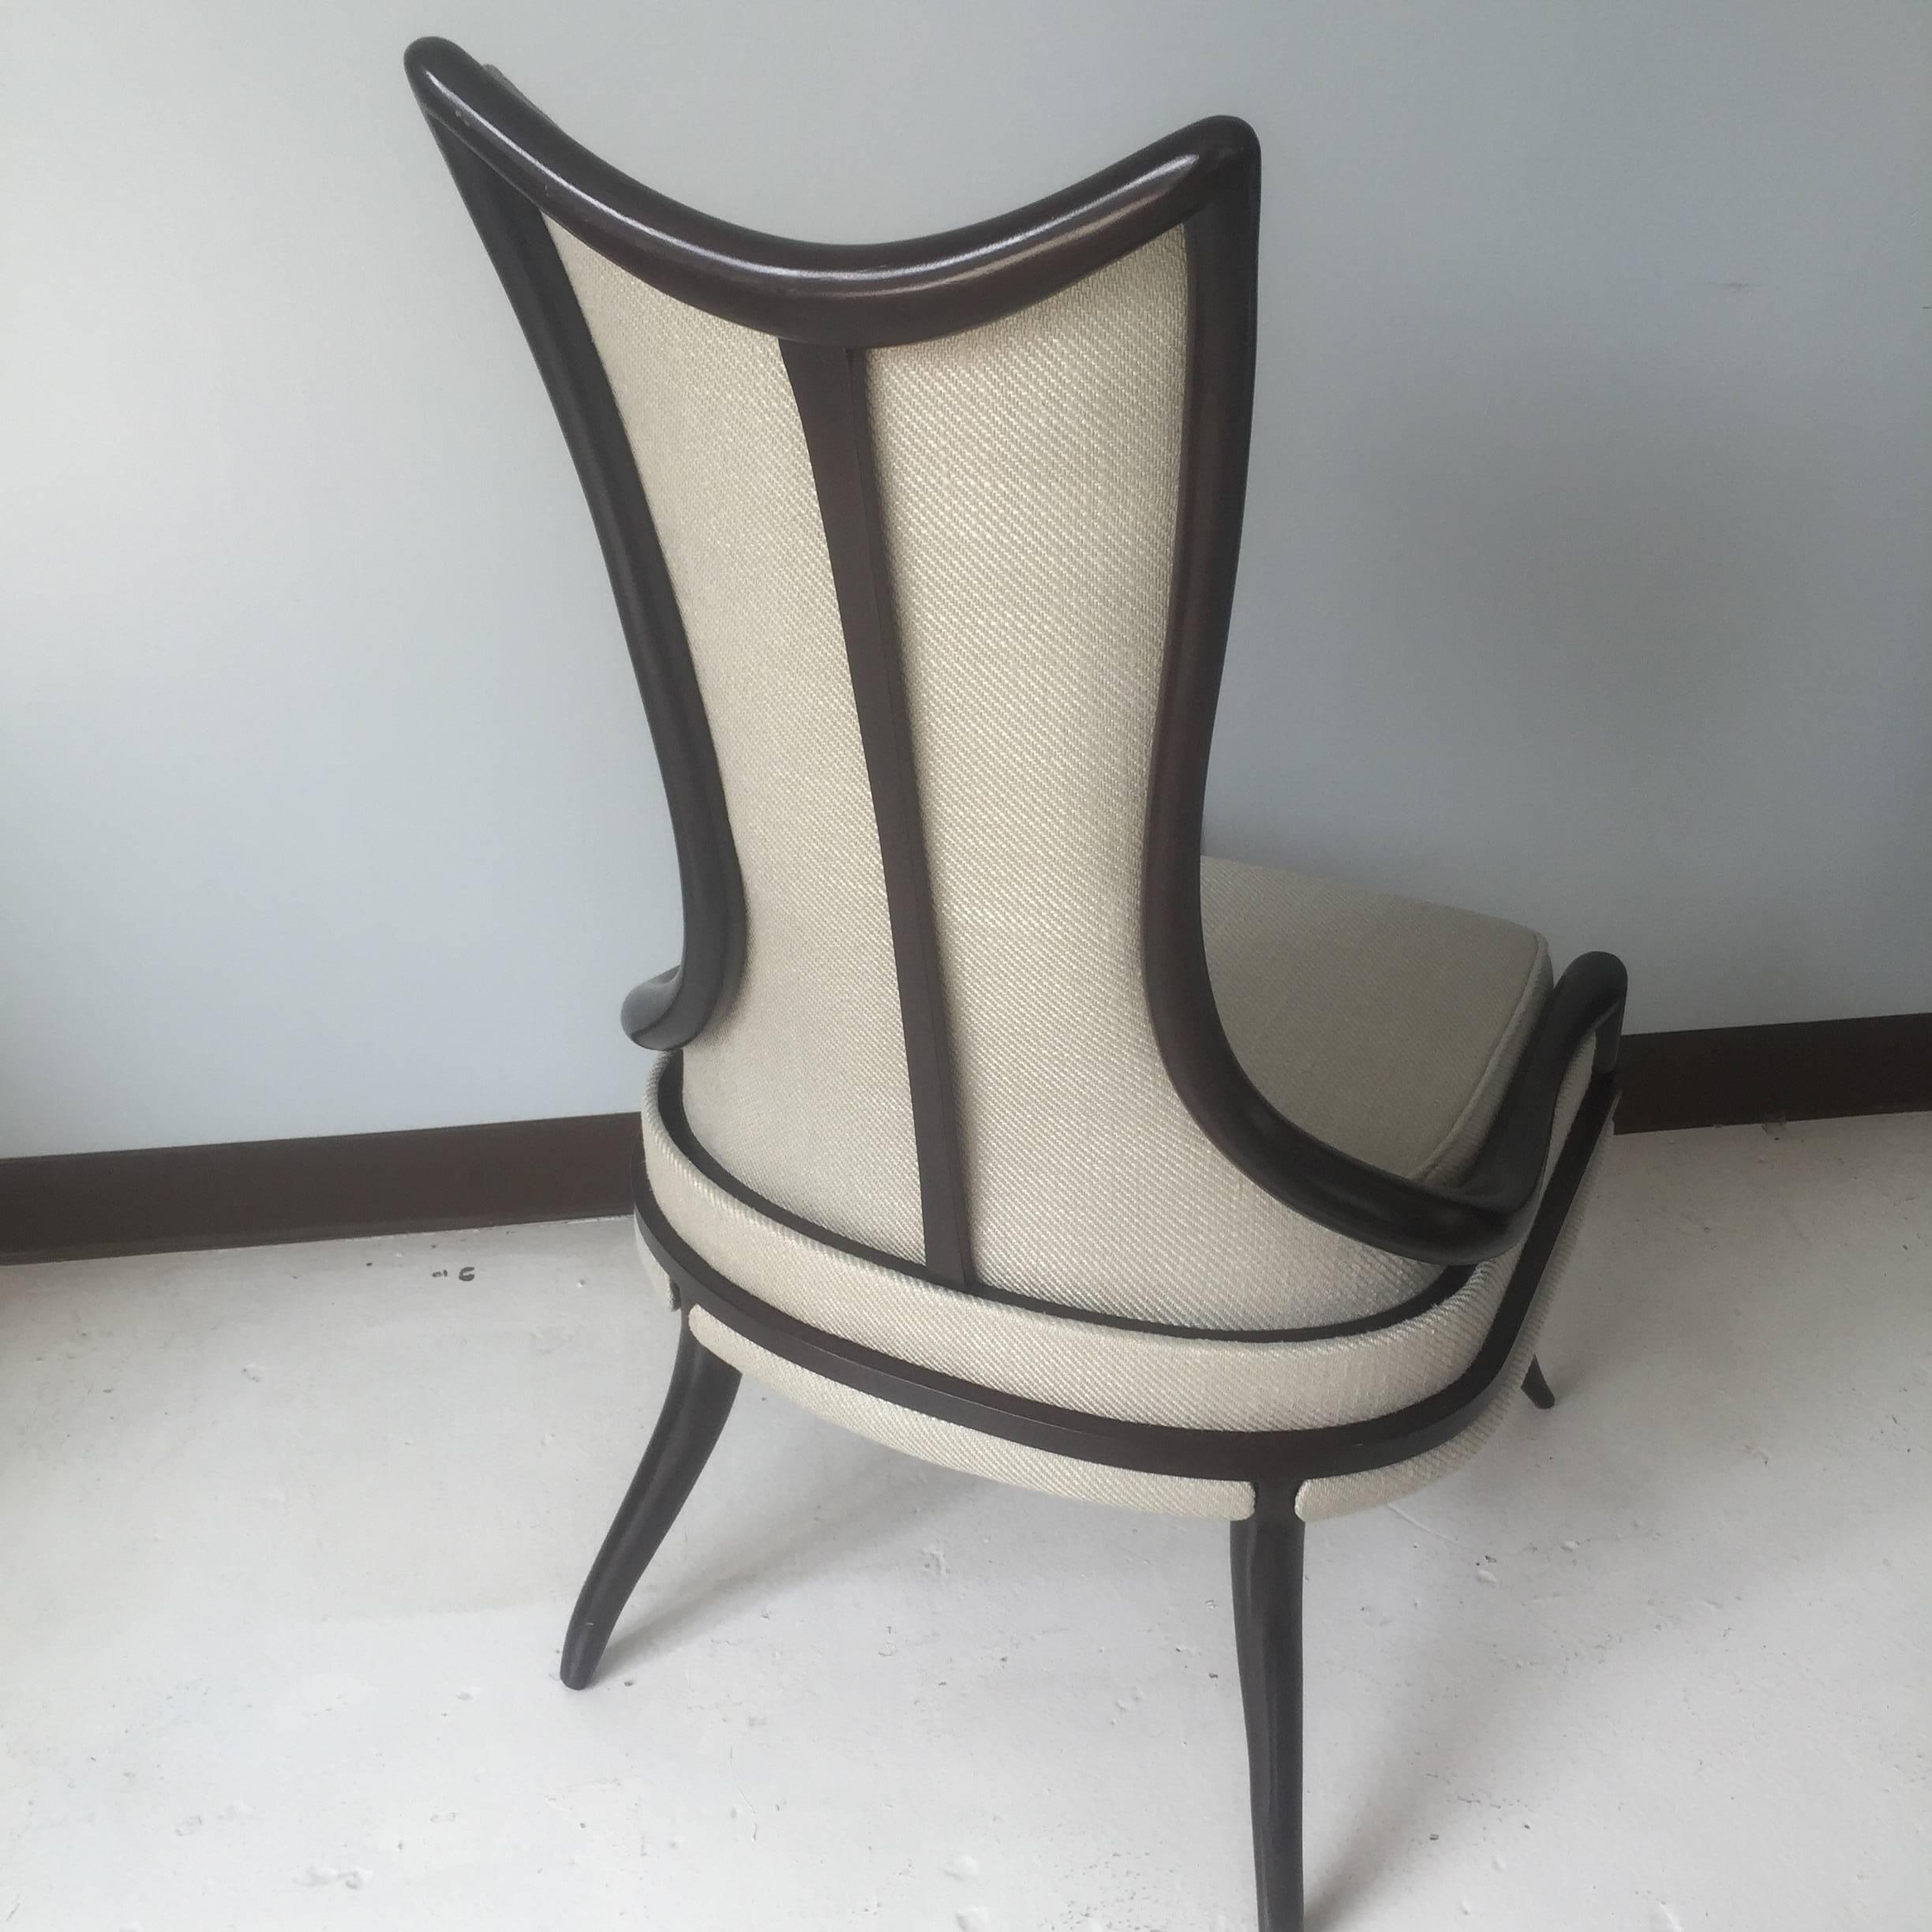 Midcentury Monteverdi Young Sculptural Chair In Excellent Condition For Sale In St. Louis, MO